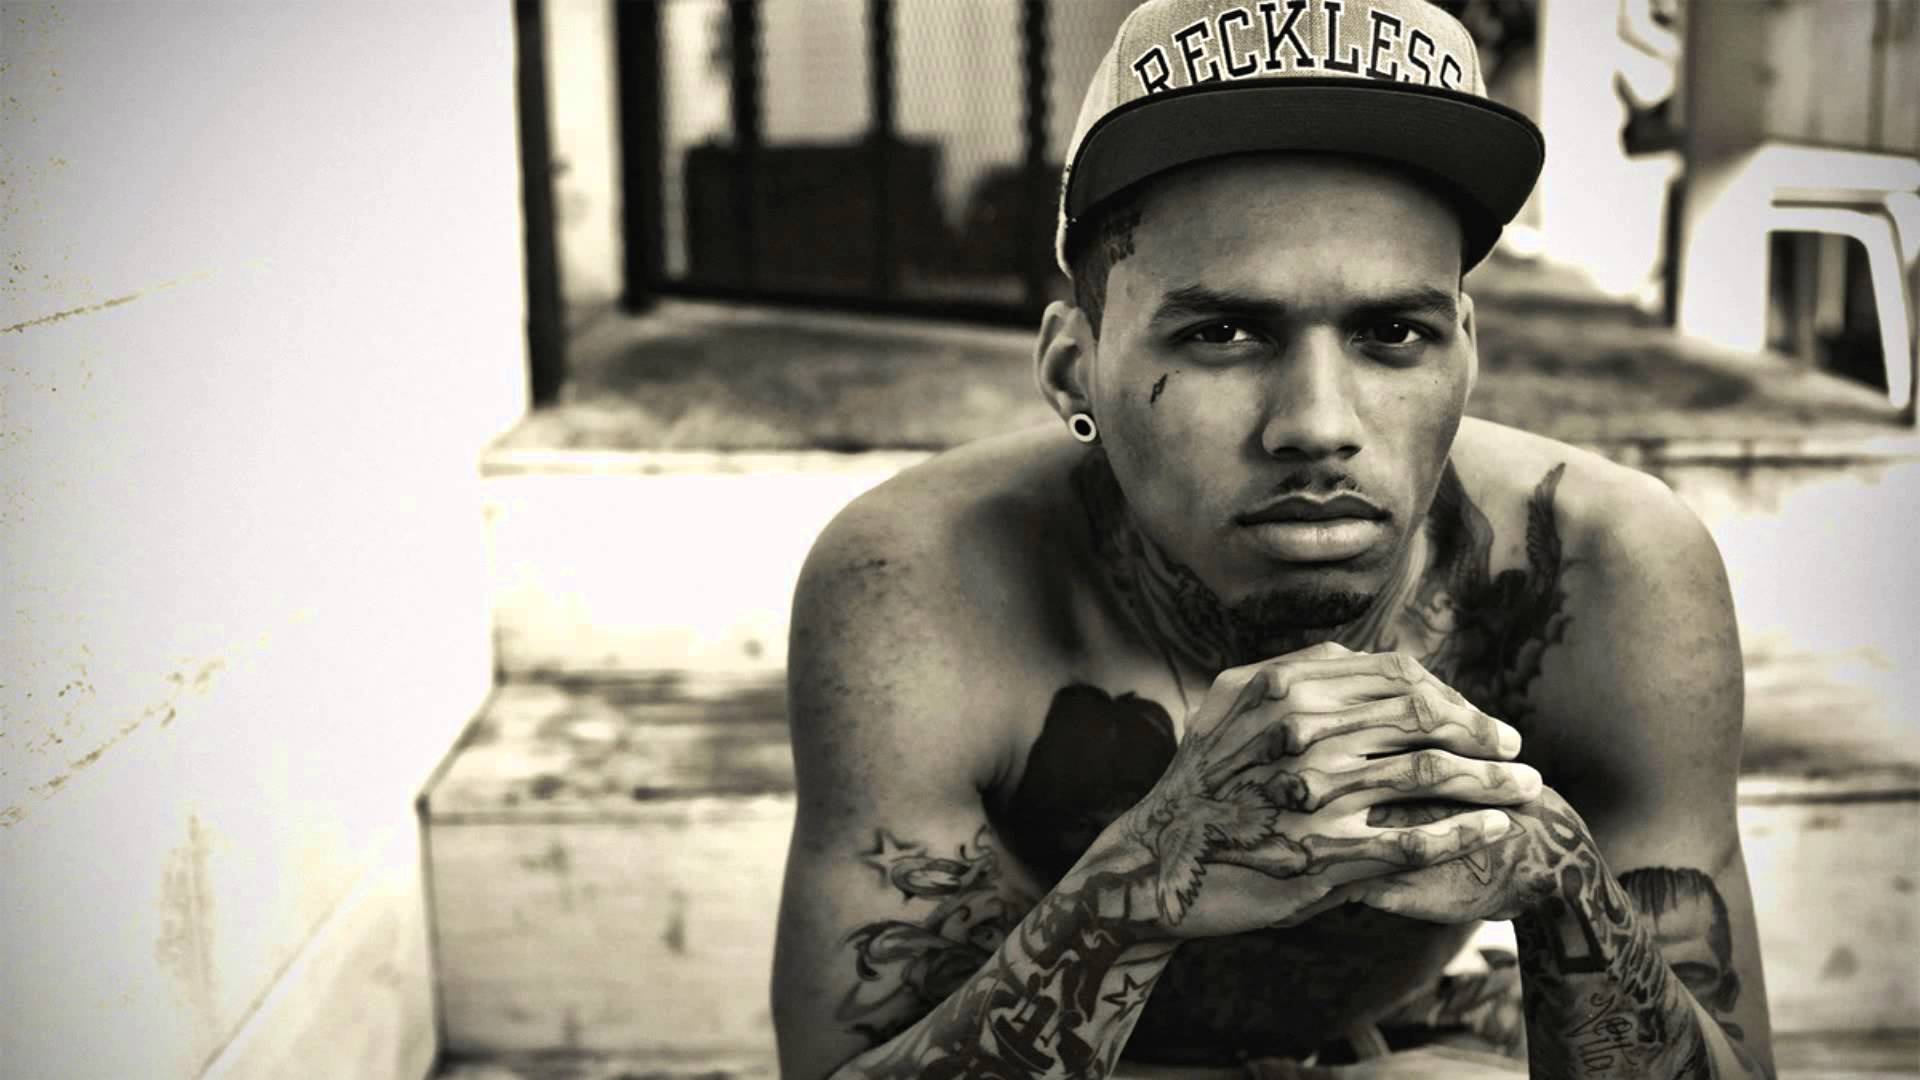 Put On (Am I Wrong) by Kid Ink on Beatsource